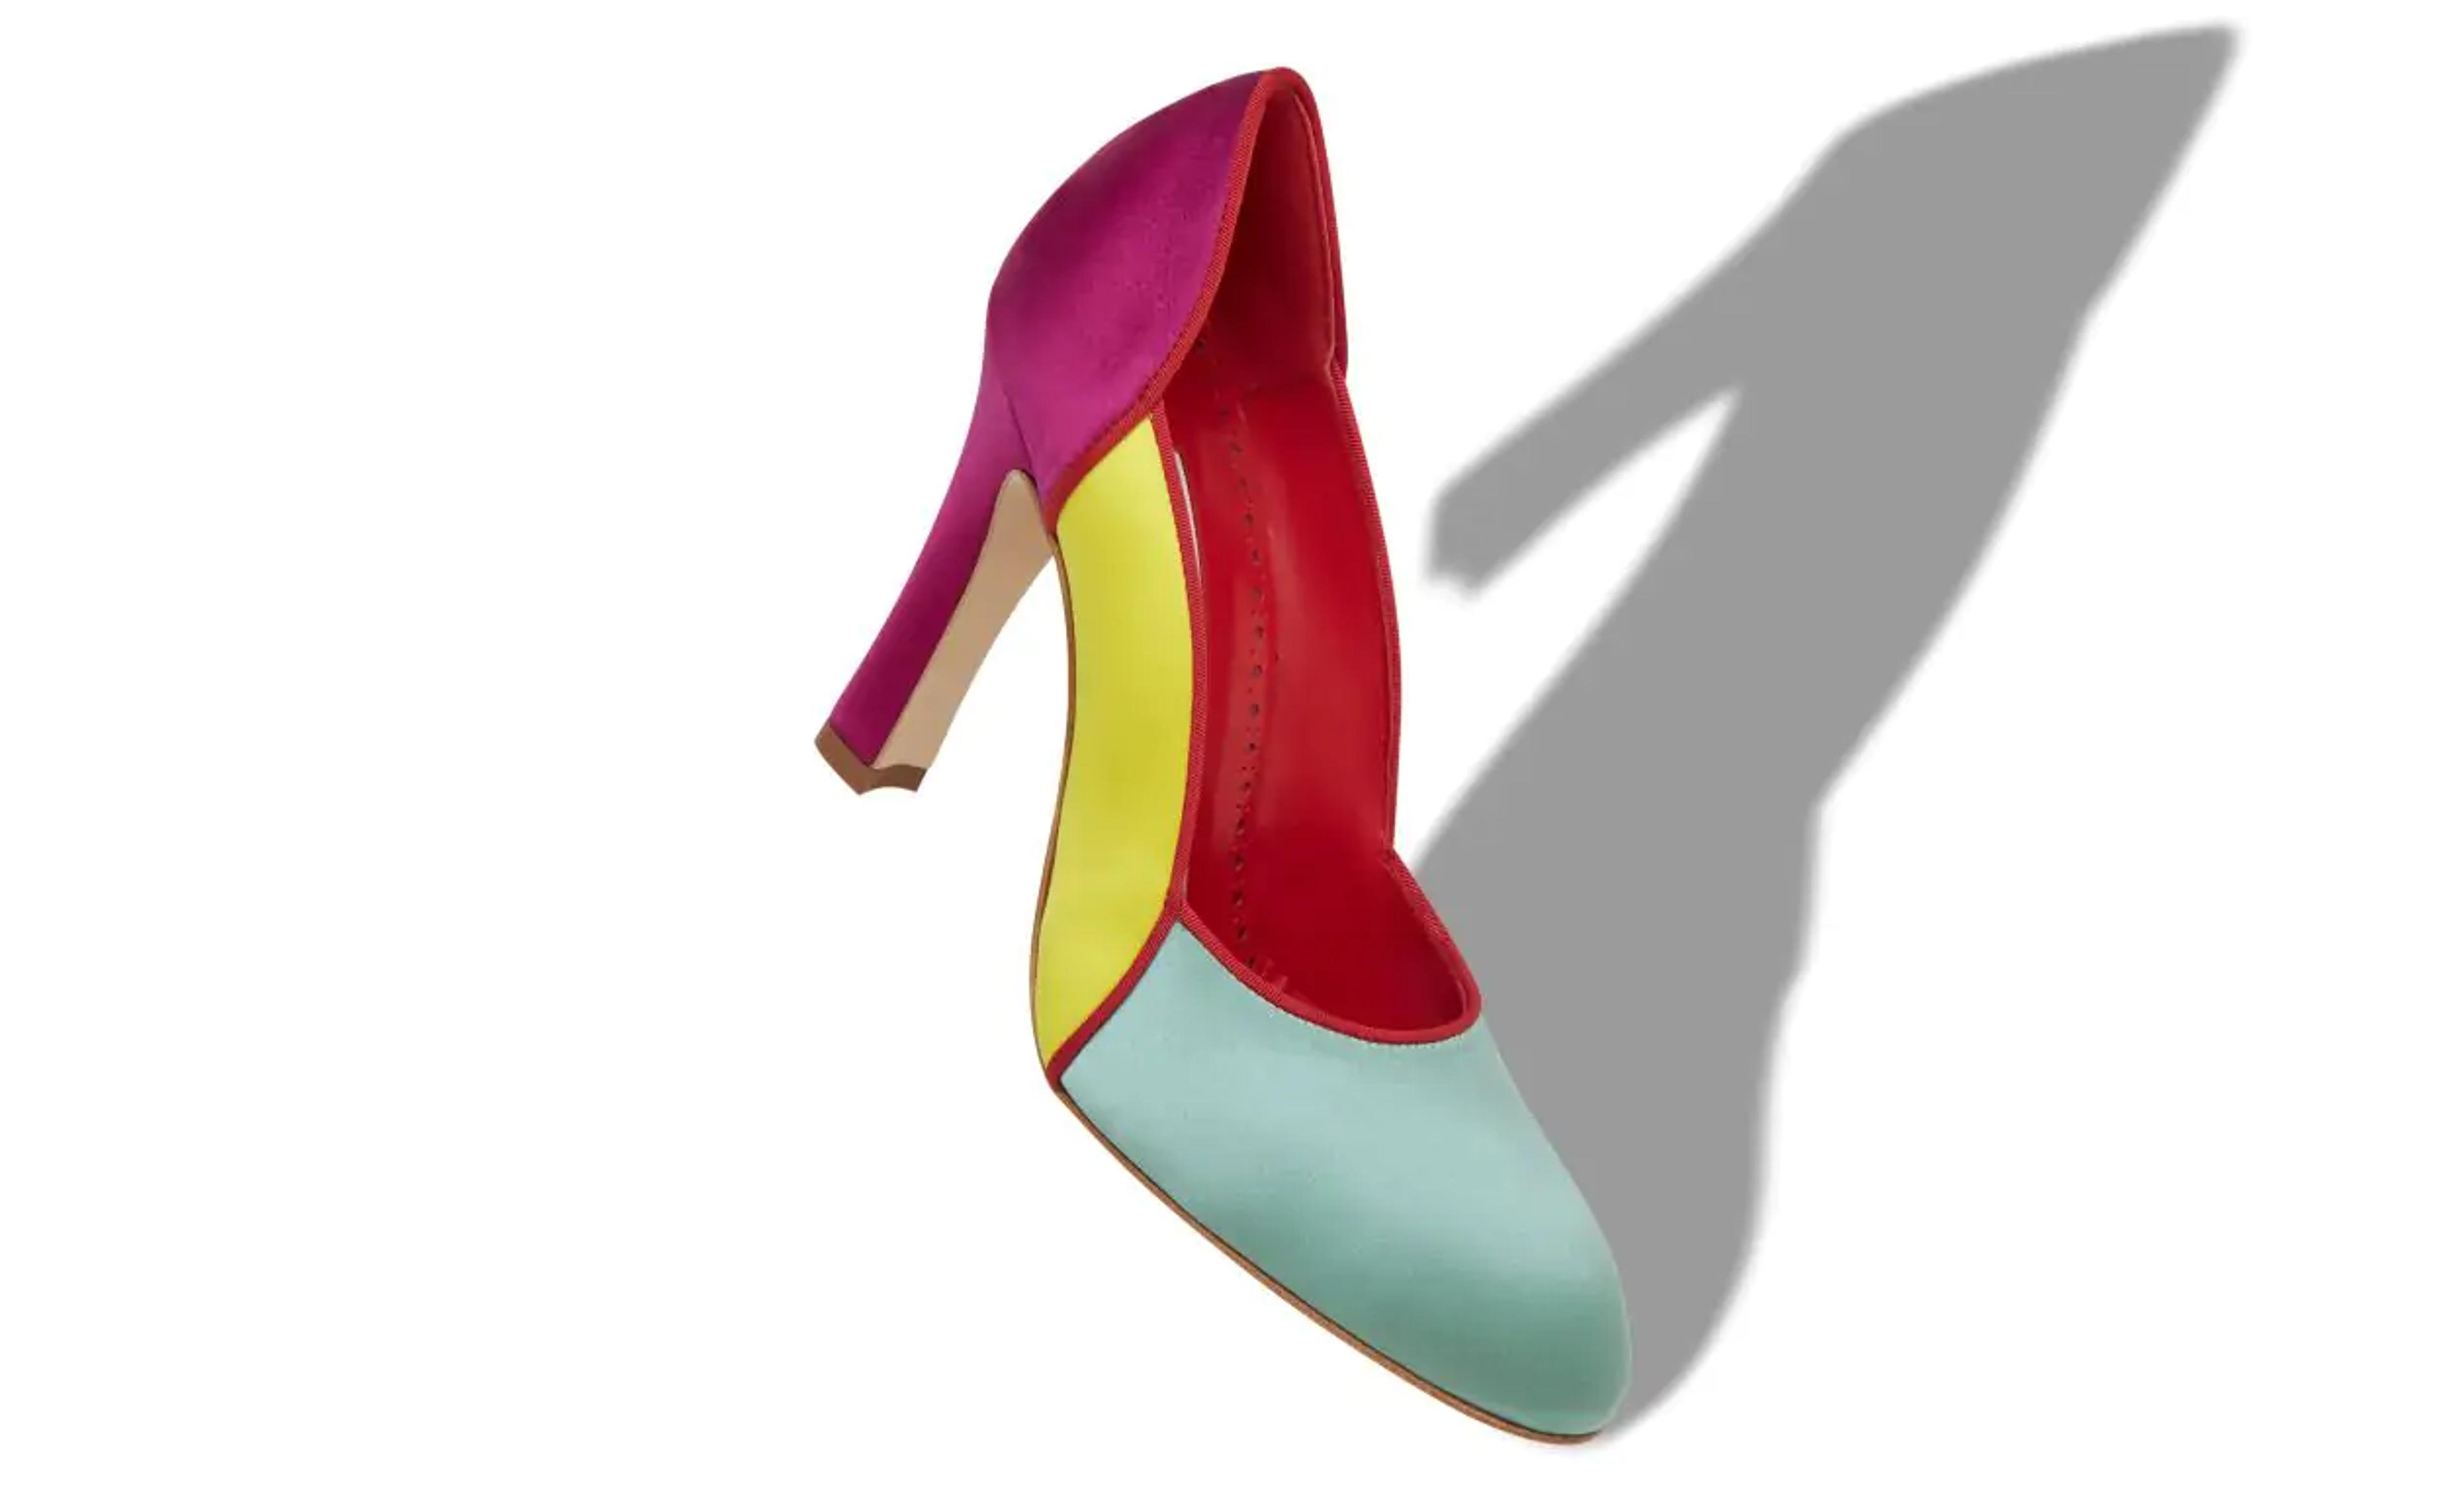 TRIONAN | Teal, Yellow and Pink Satin Scalloped Pumps | Manolo Blahnik